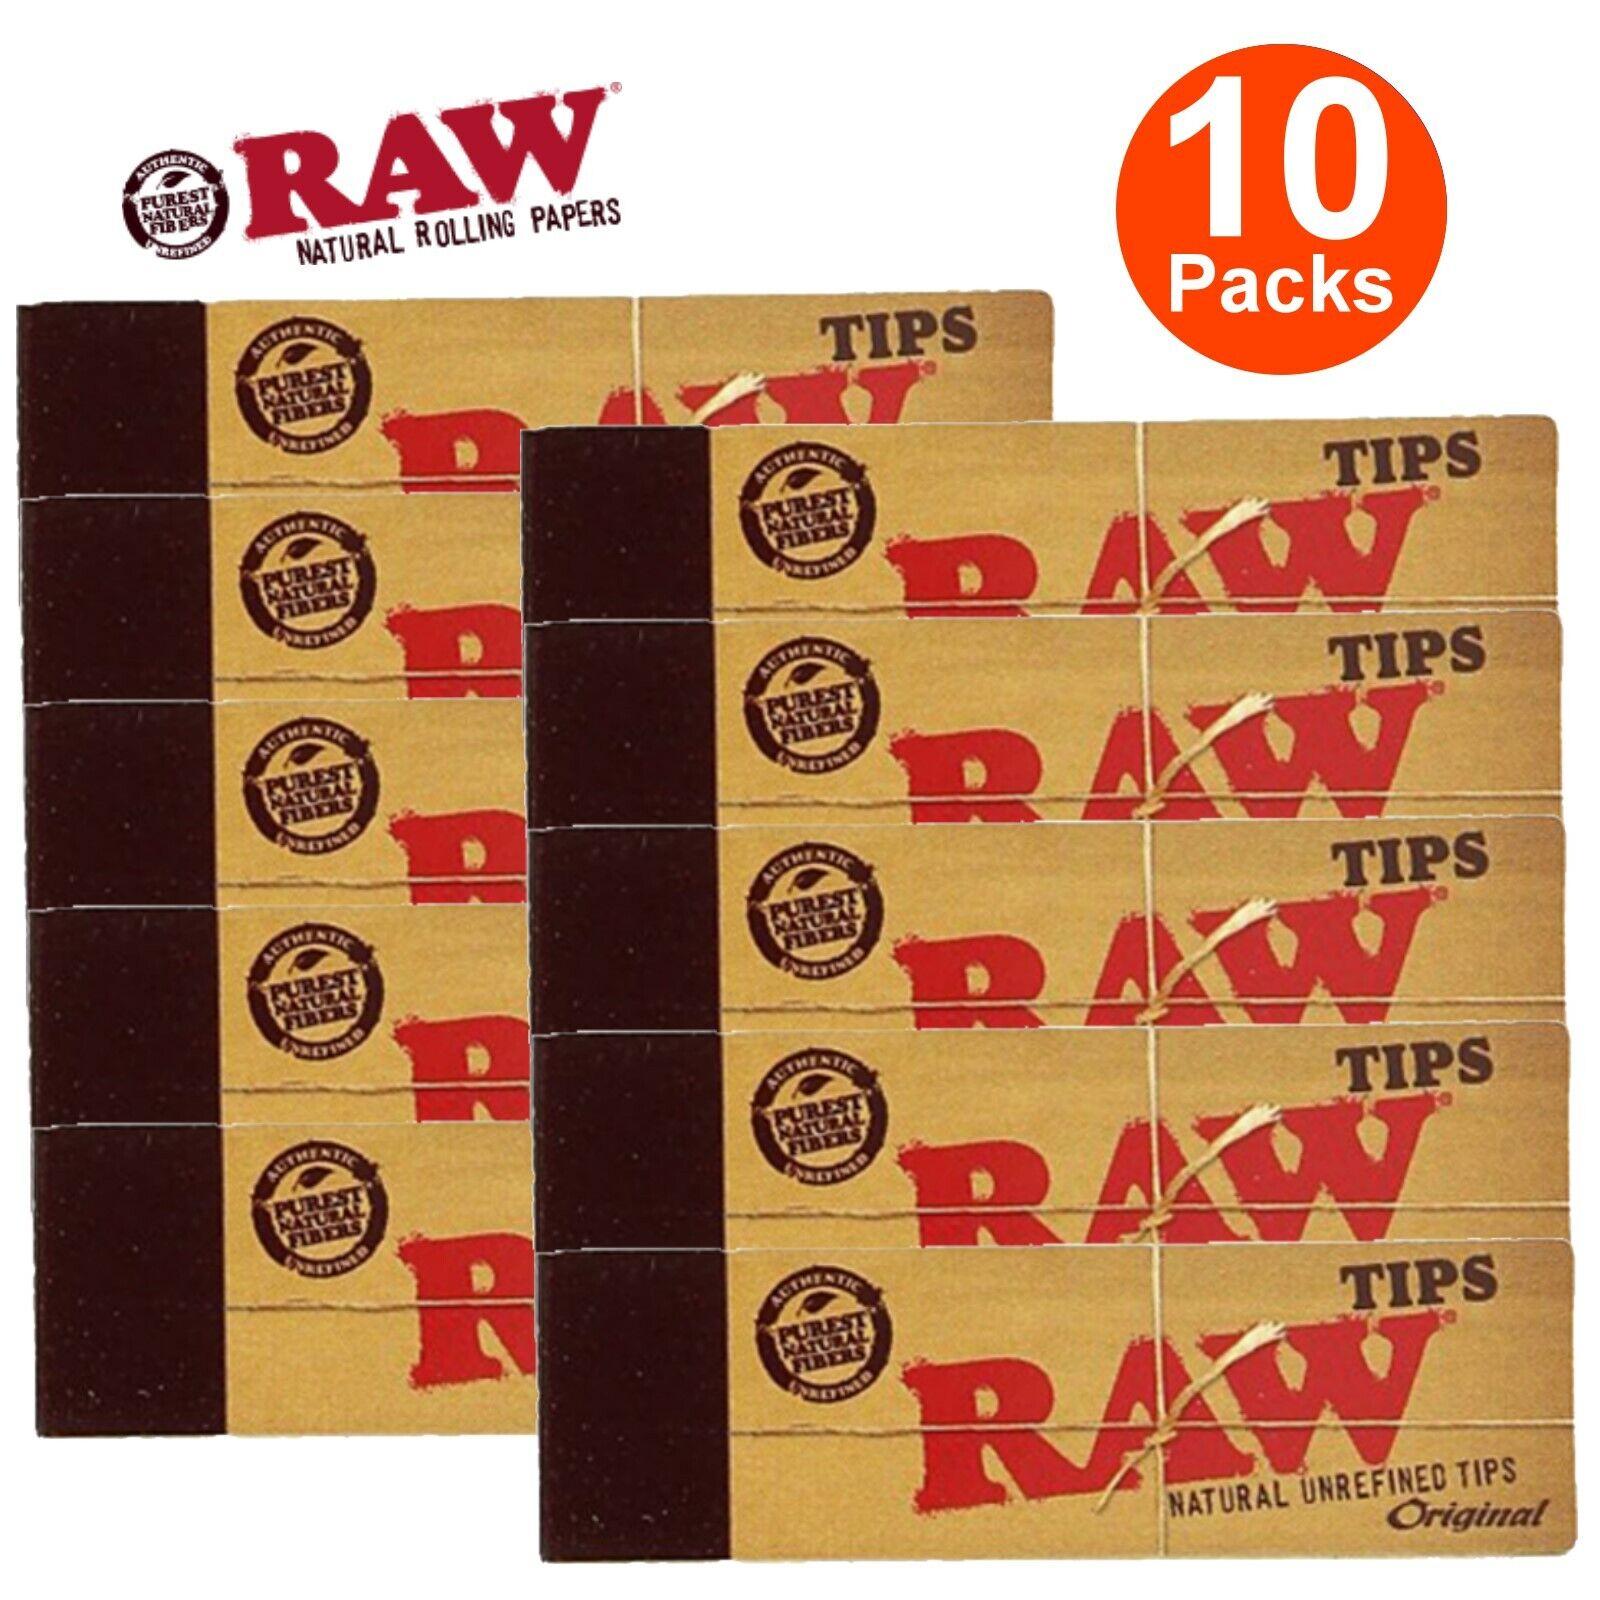 RAW Original Natural Unrefined Tips 10 Booklets (50 Tips/Pack) - 